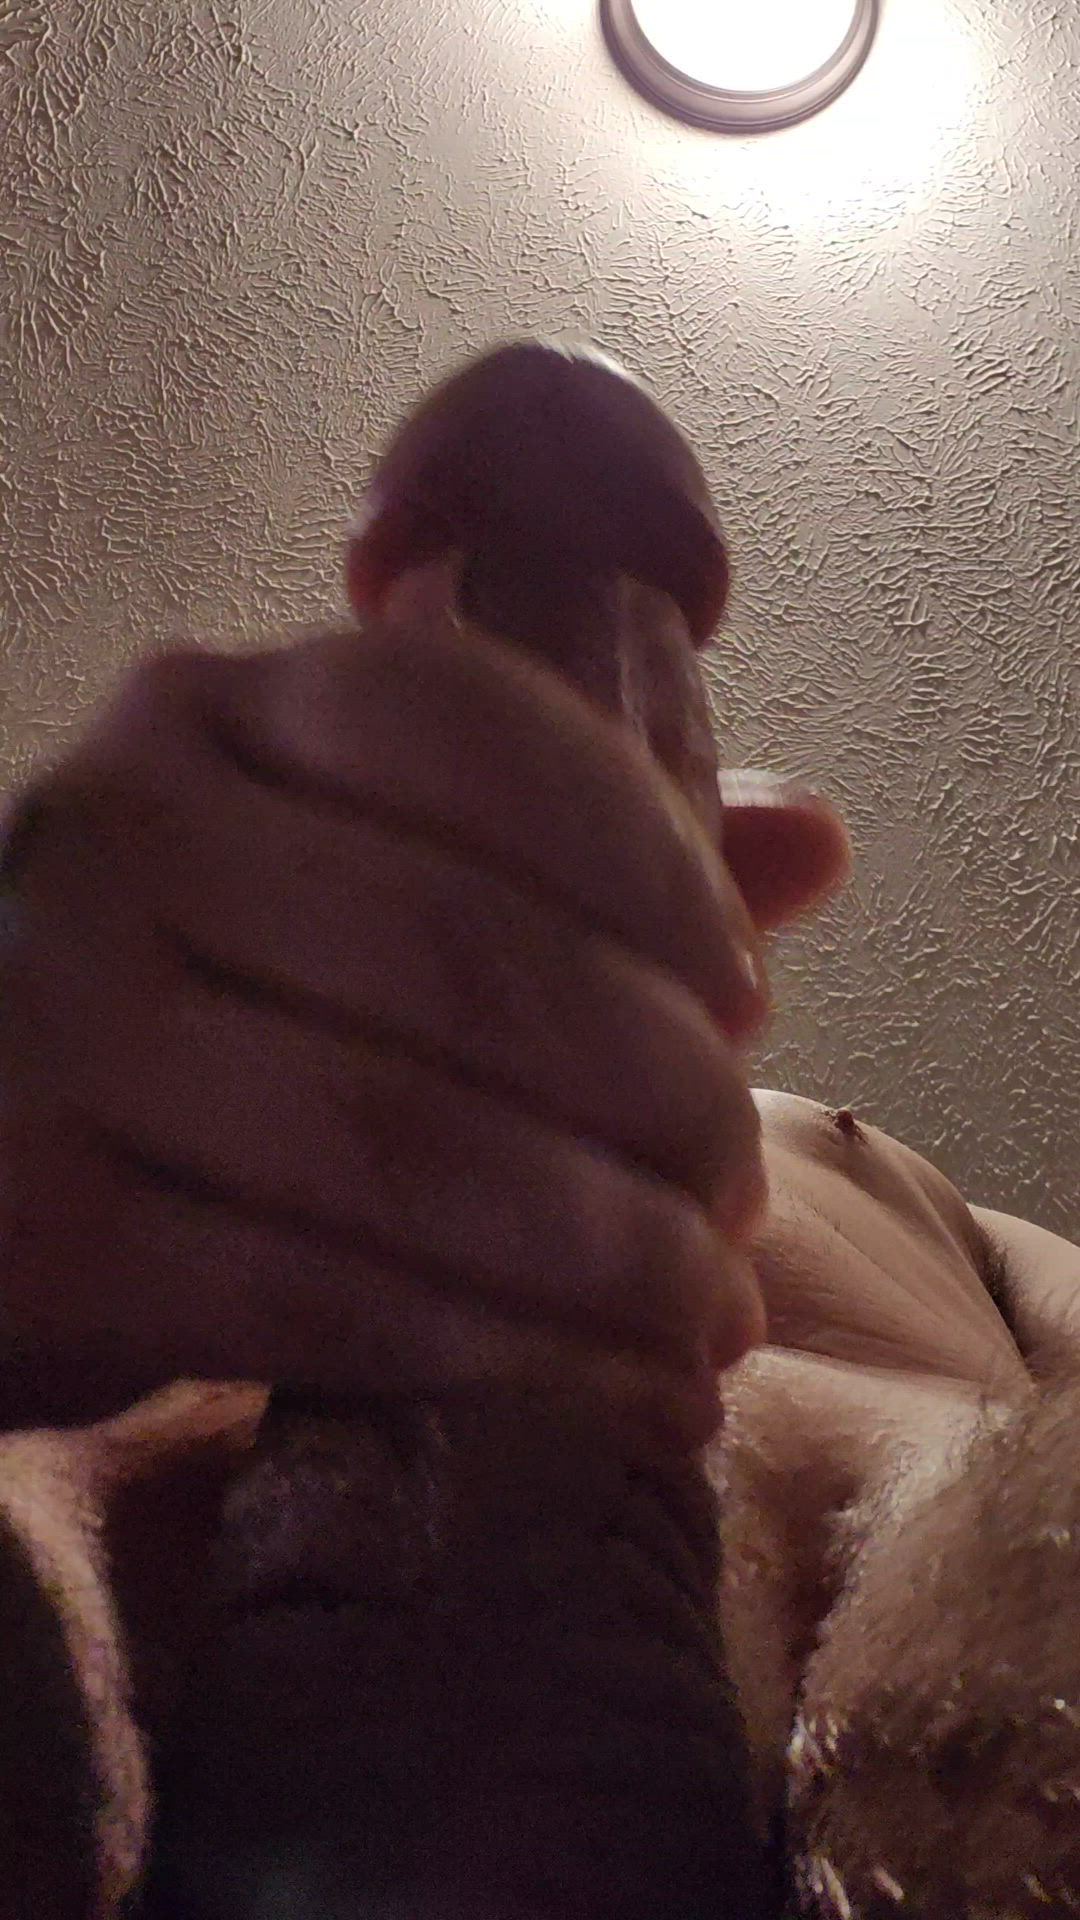 Big Dick porn video with onlyfans model dirtymagic94 <strong>@dirtymagic94</strong>